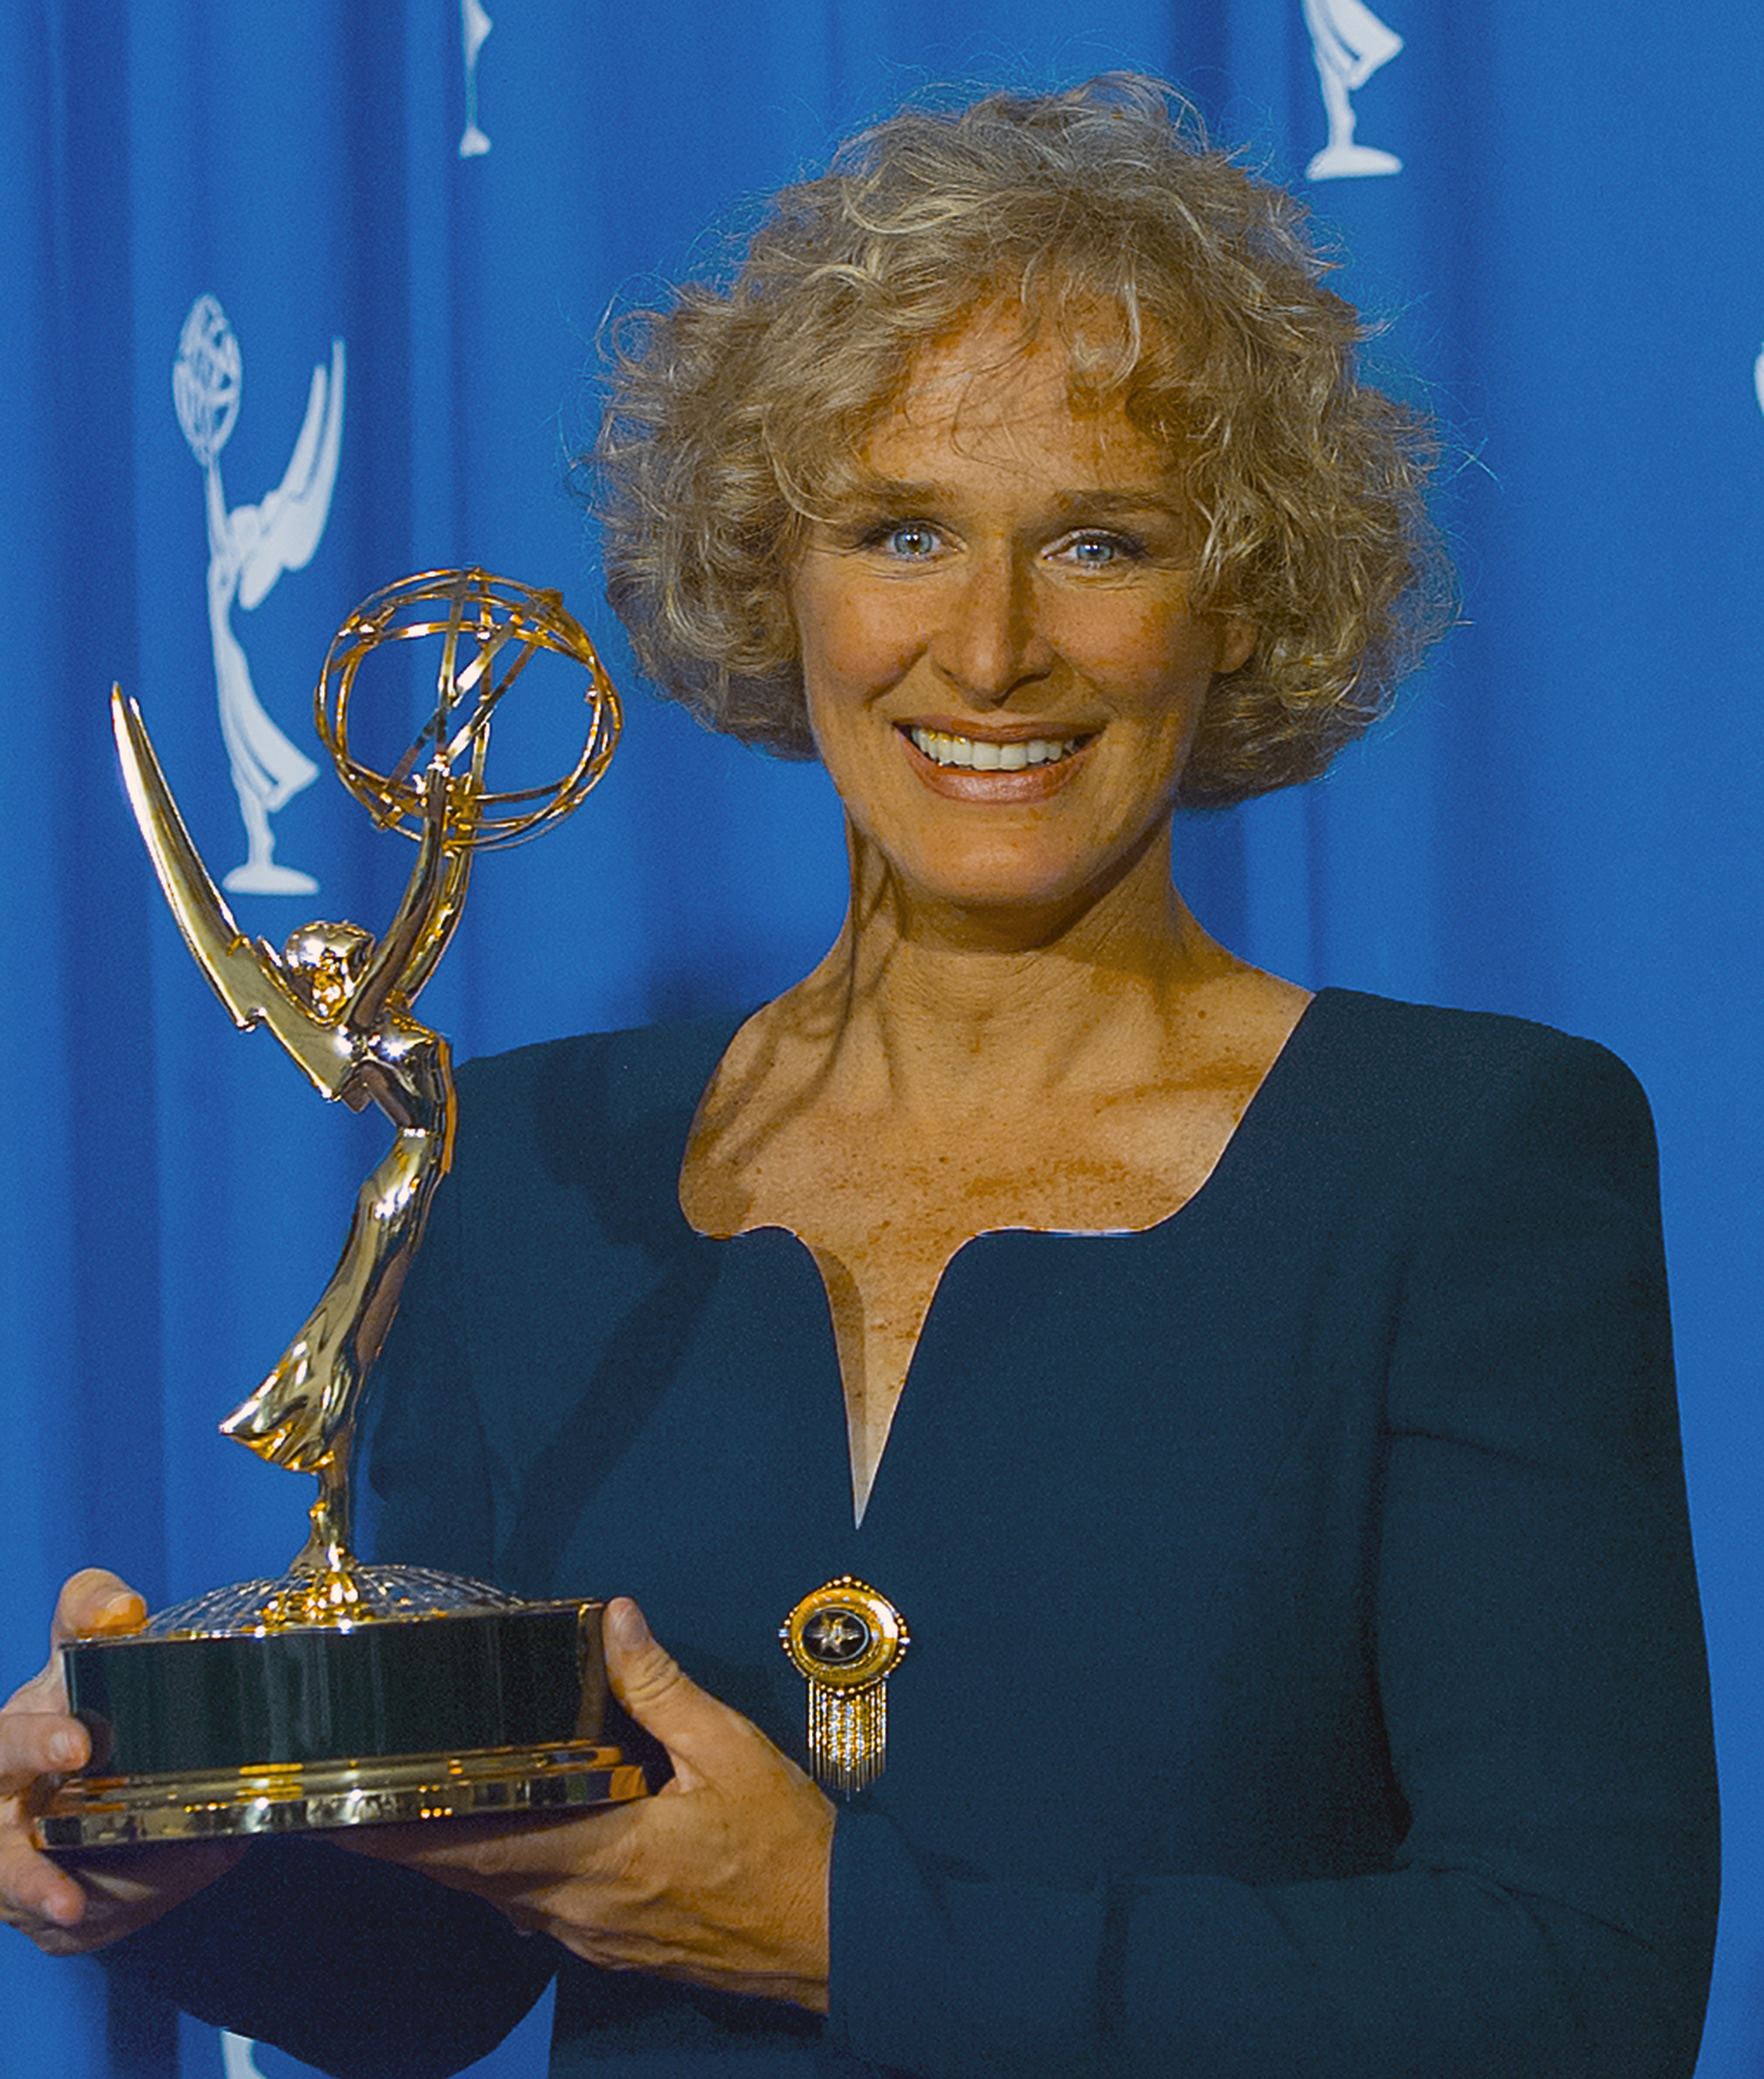 Glenn Close with her Emmy trophy in Los Angeles, California on September 10, 1995 | Source: Getty Images